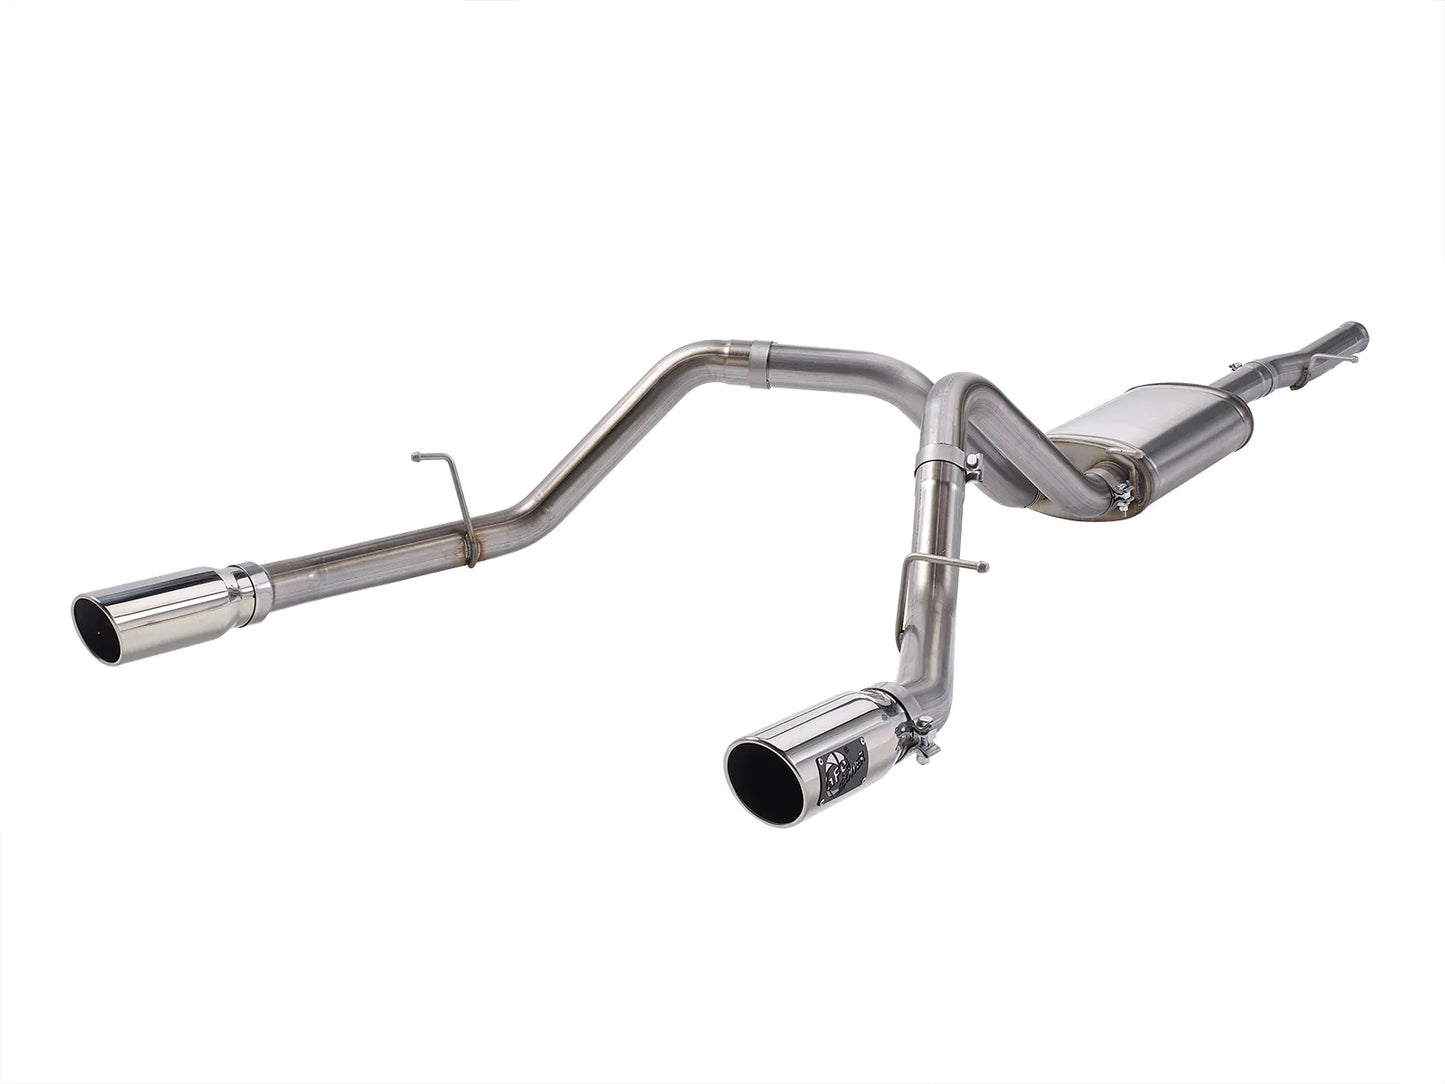 aFe Apollo GT Series Cat-Back Exhaust System for 2009-2018 GM Trucks (49-44111-P)